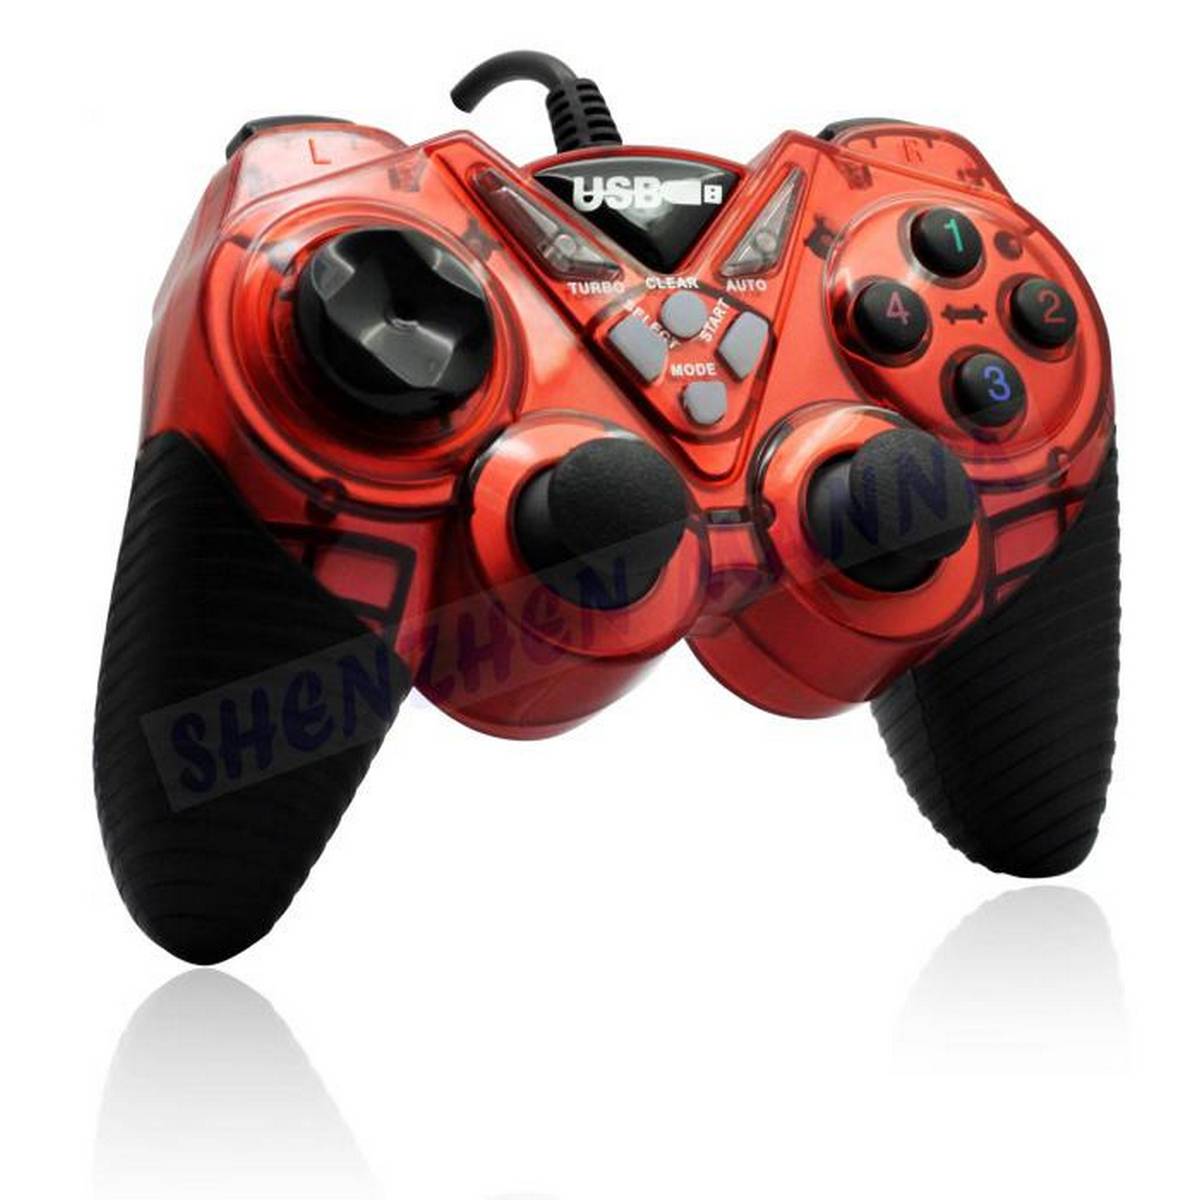 USB-908 DOUBLE SHOCK USB GAME CONTROLLER - Controller - Gaming Controller - Wired controller - USB wired controller - USB-908 Gaming controller